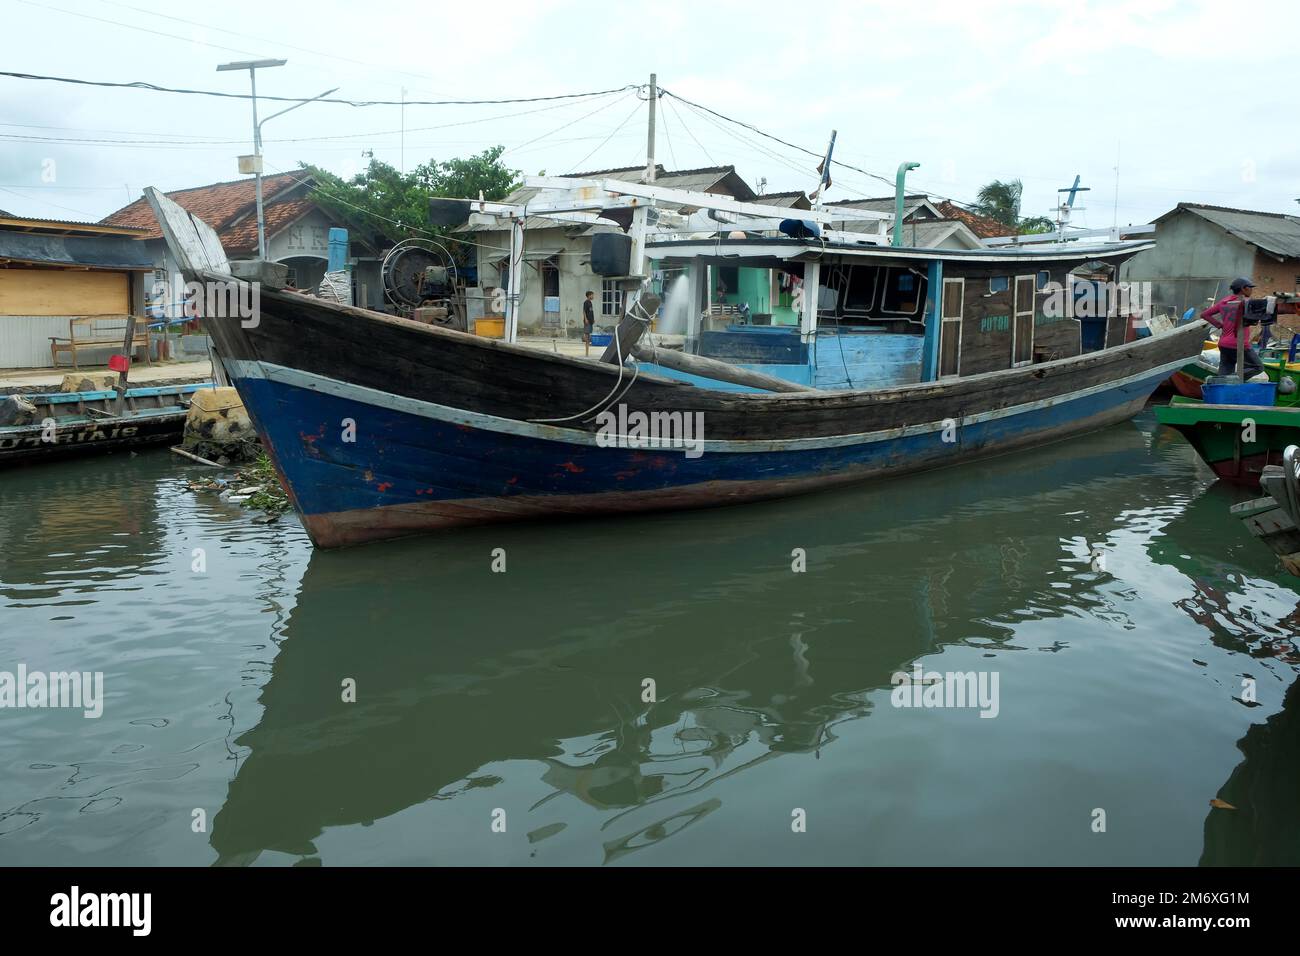 Lampung, Indonesia 9 November 2022: Rows of fishing boats on the pier with shadow reflections in the water against a clear sky background Stock Photo